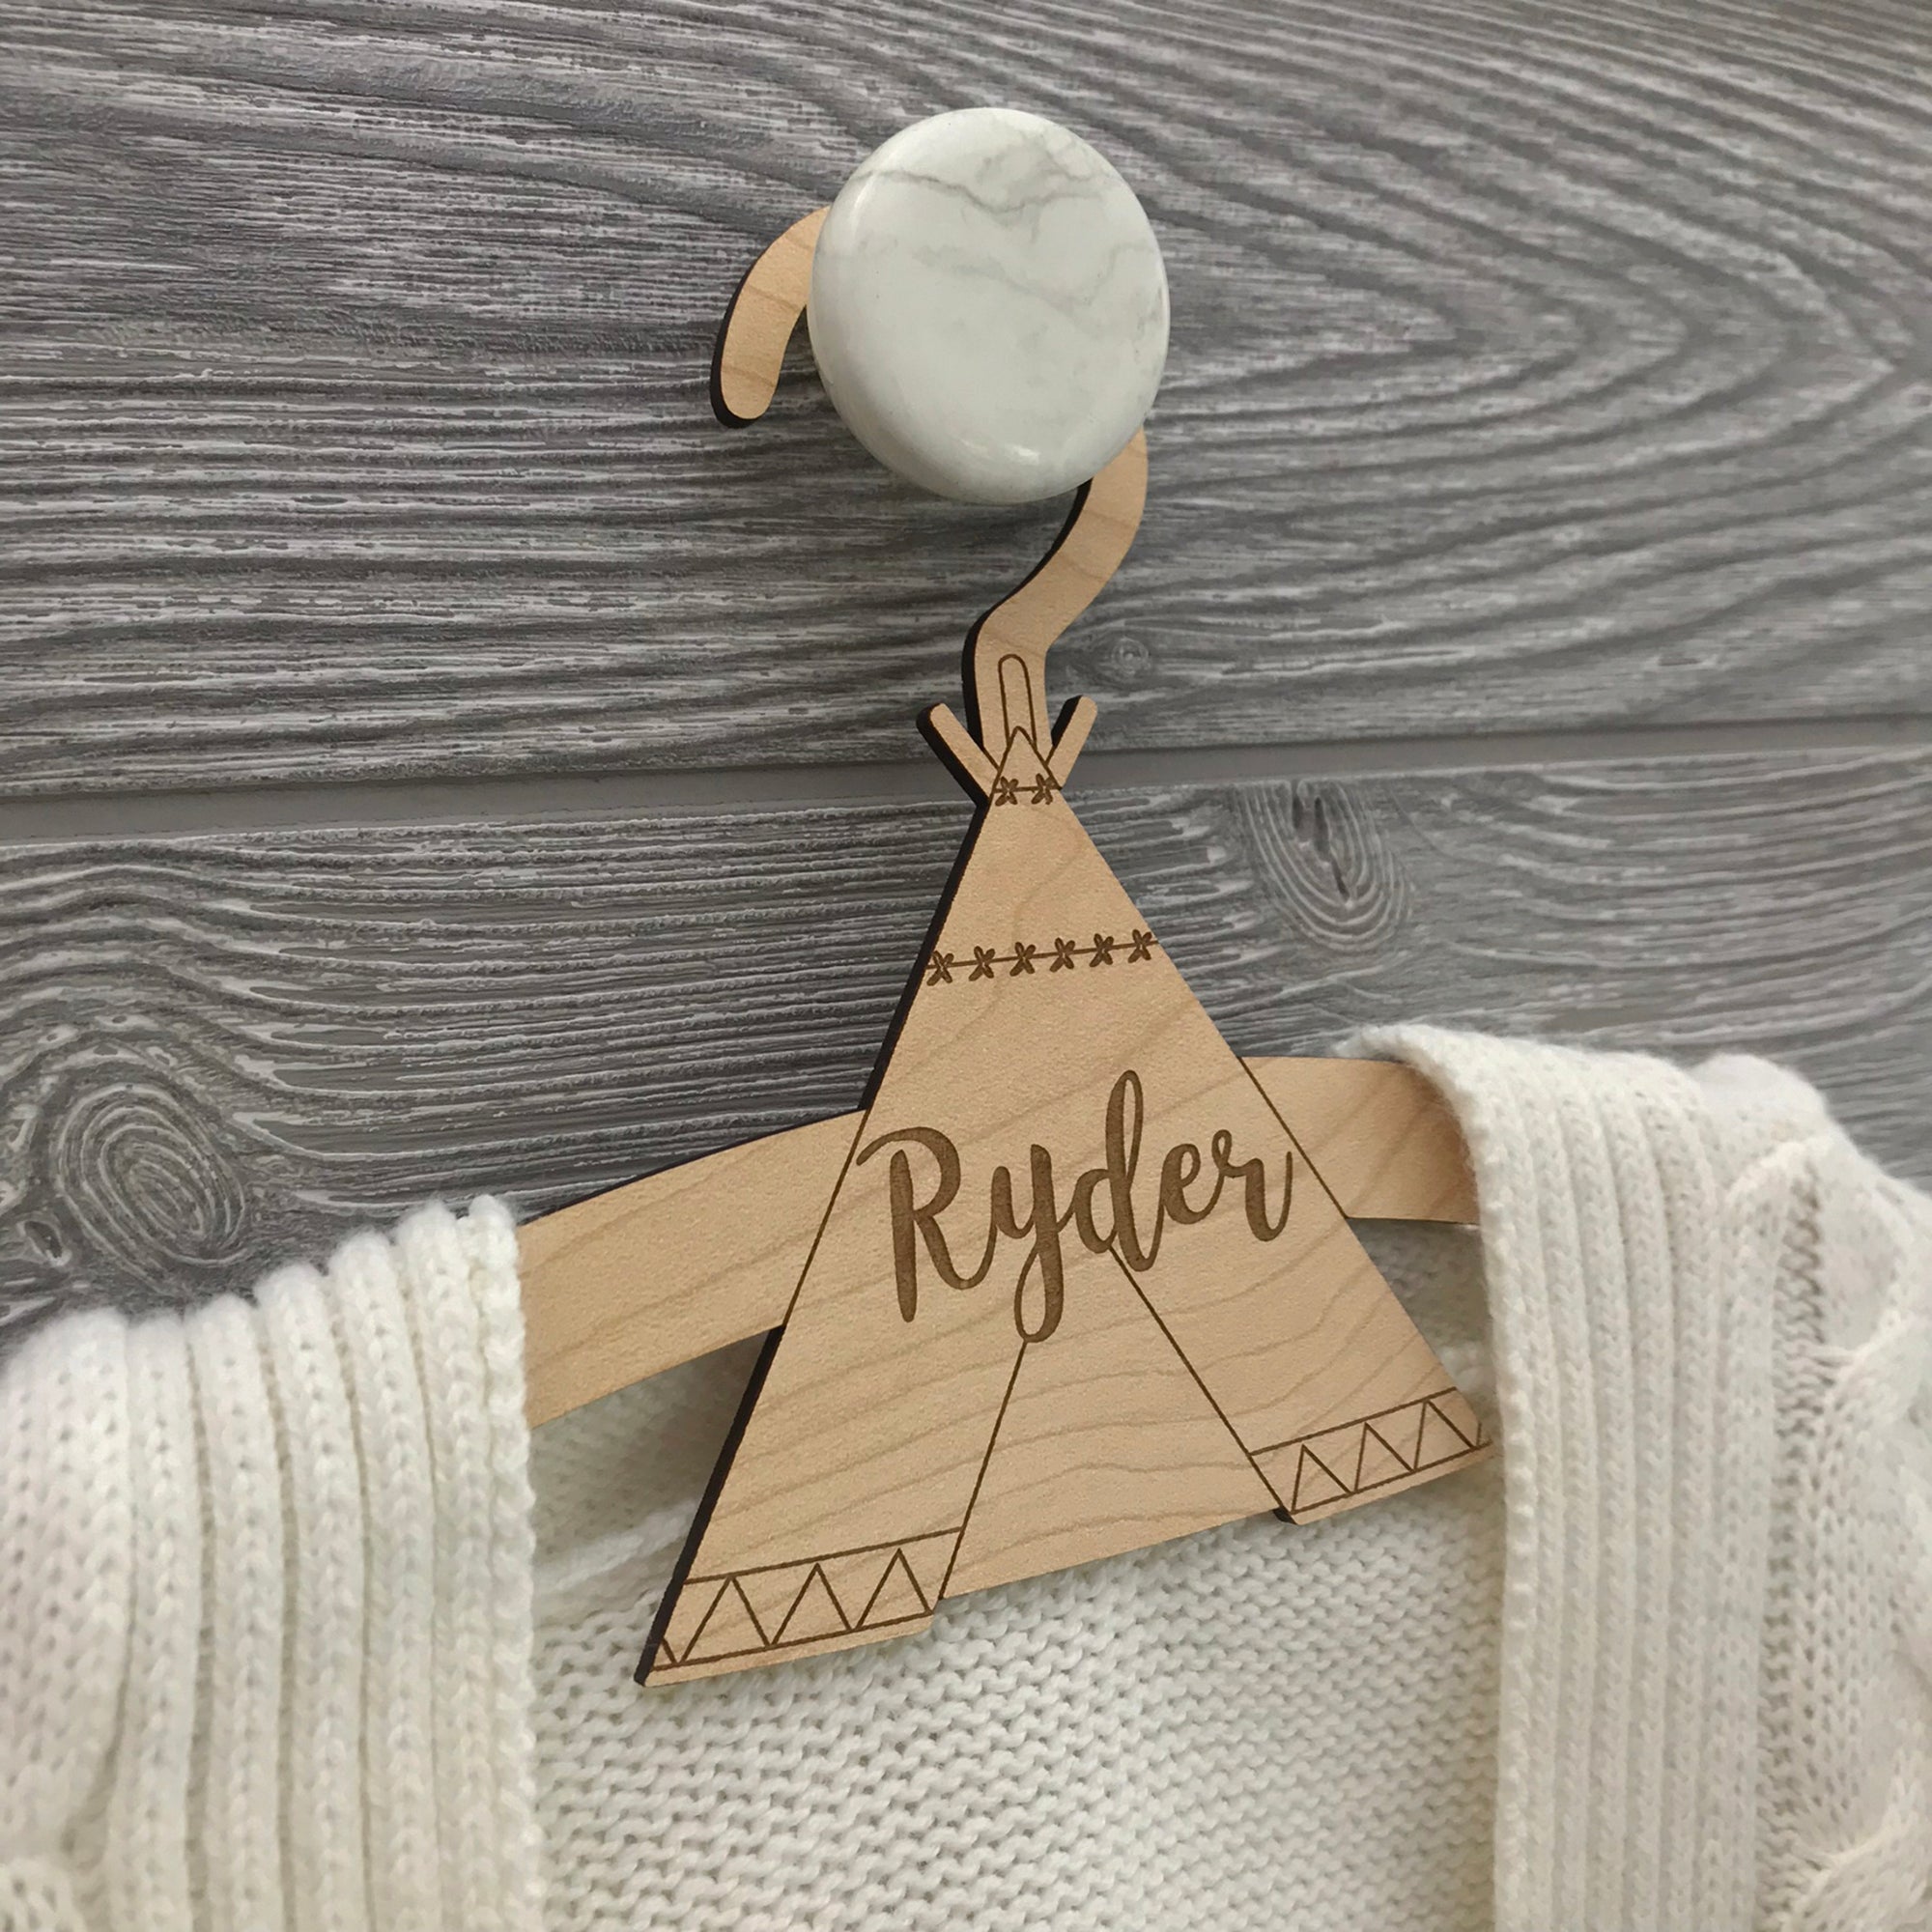 Personalized Teepee Hanger